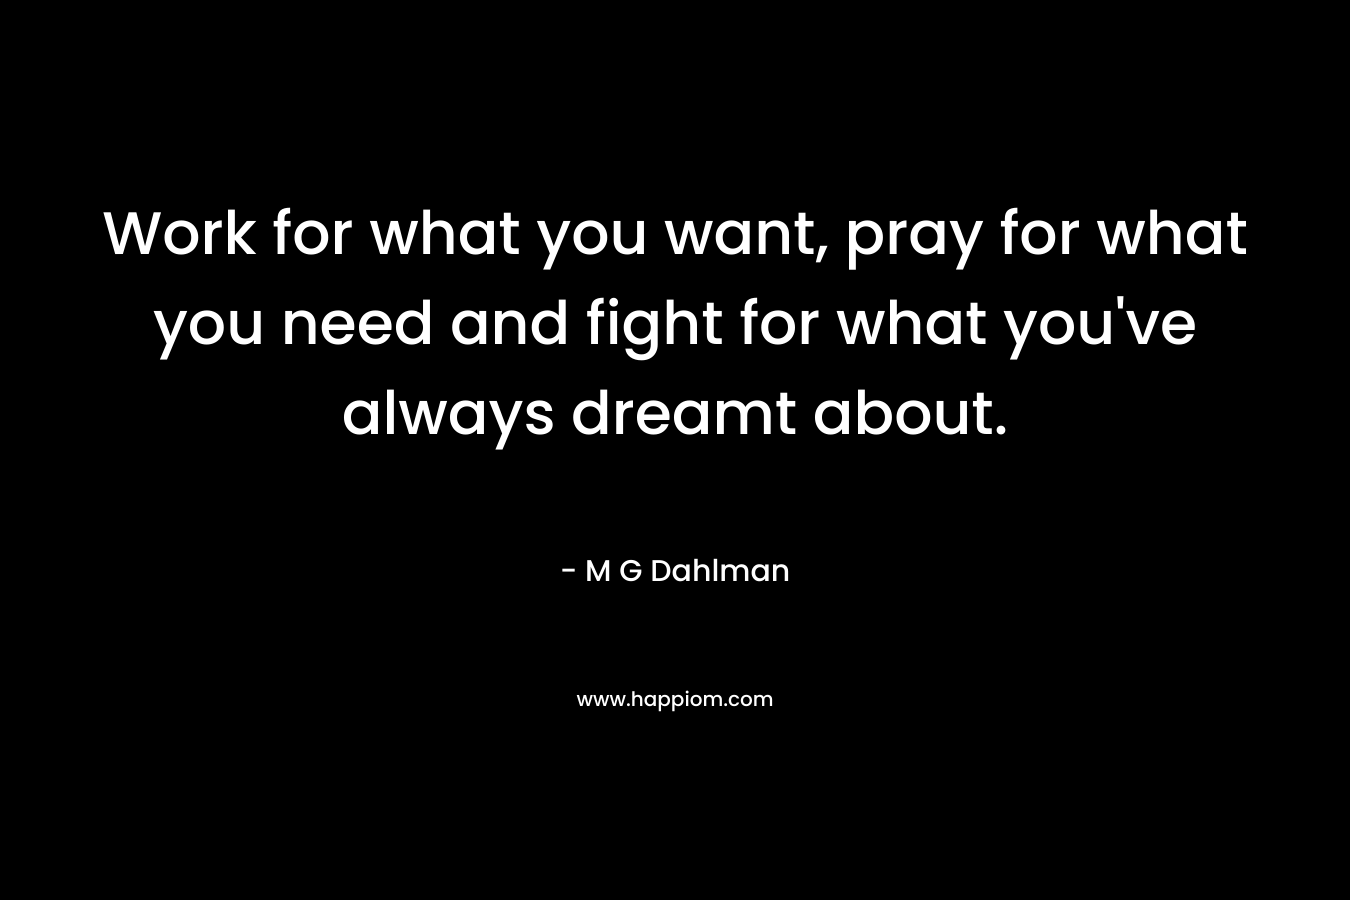 Work for what you want, pray for what you need and fight for what you've always dreamt about.